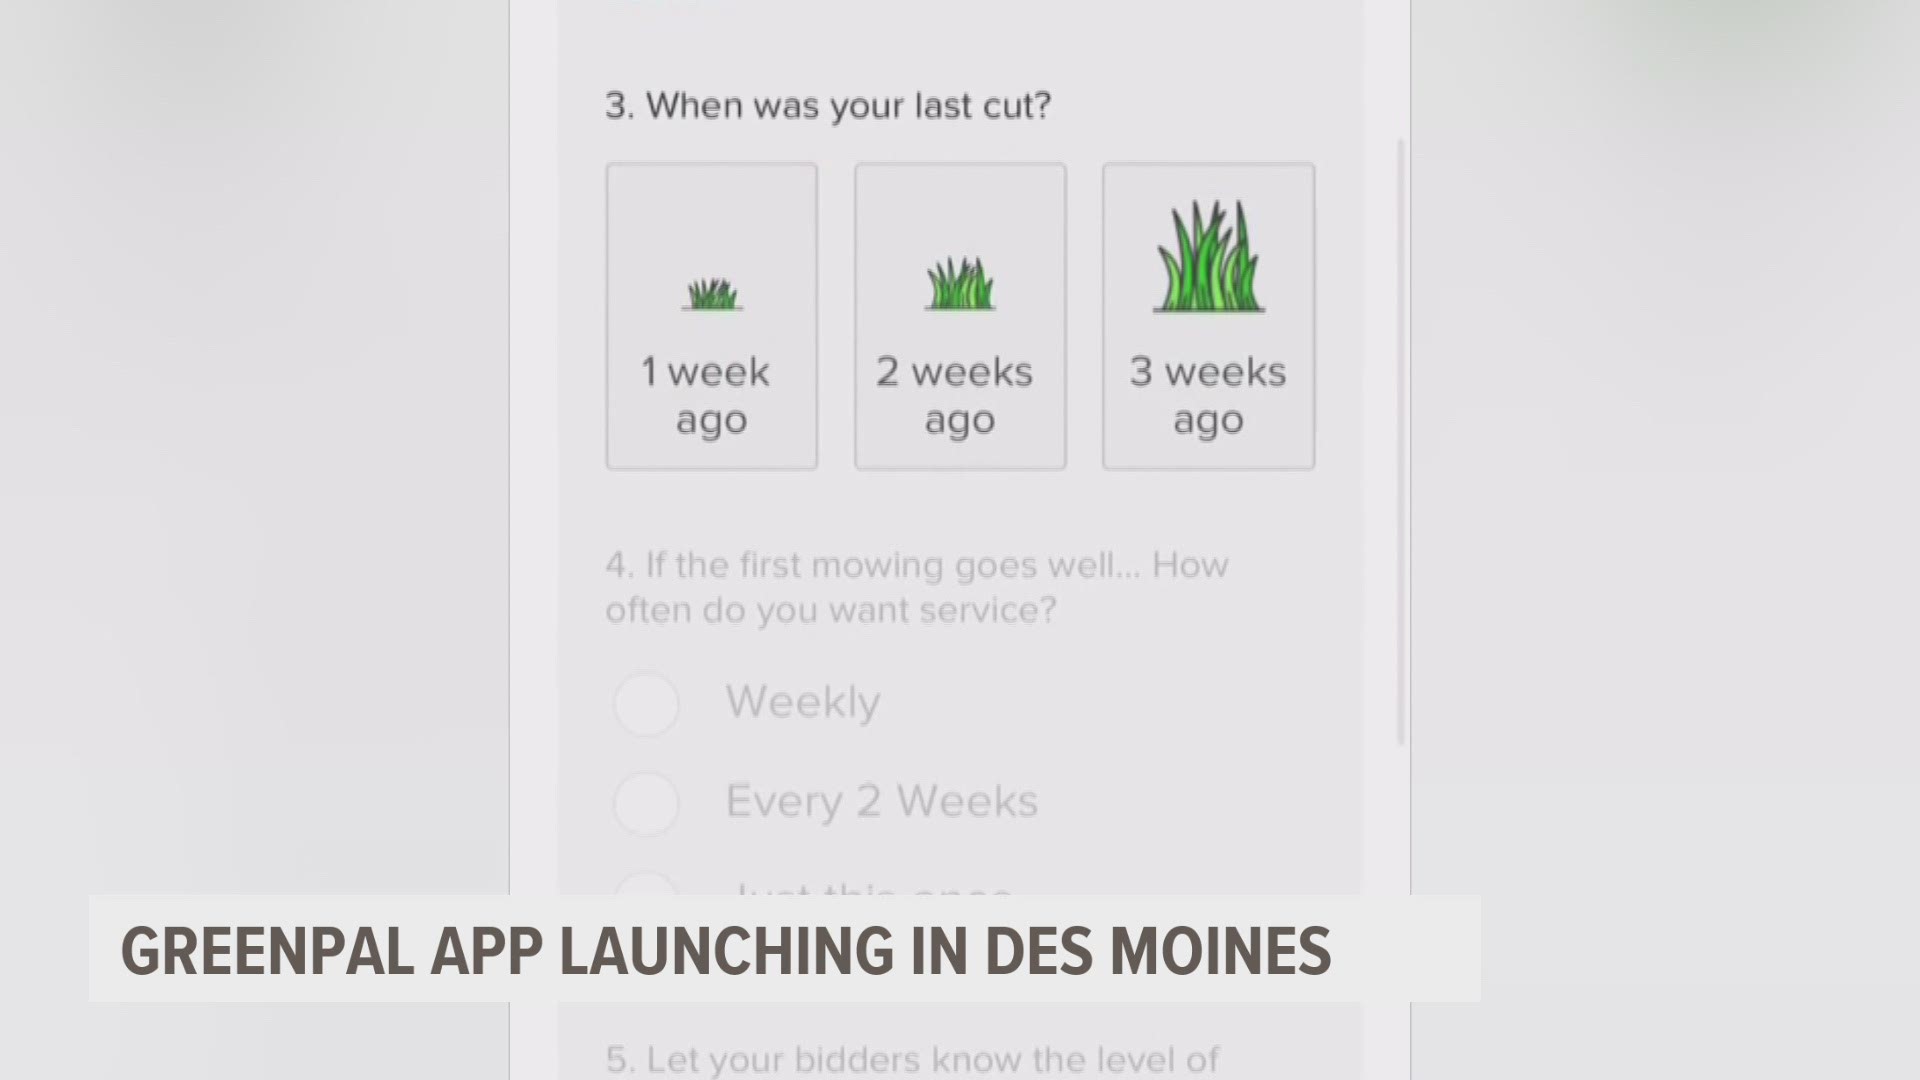 The Nashville-based company GreenPal is launching its app this week for Des Moines residents.